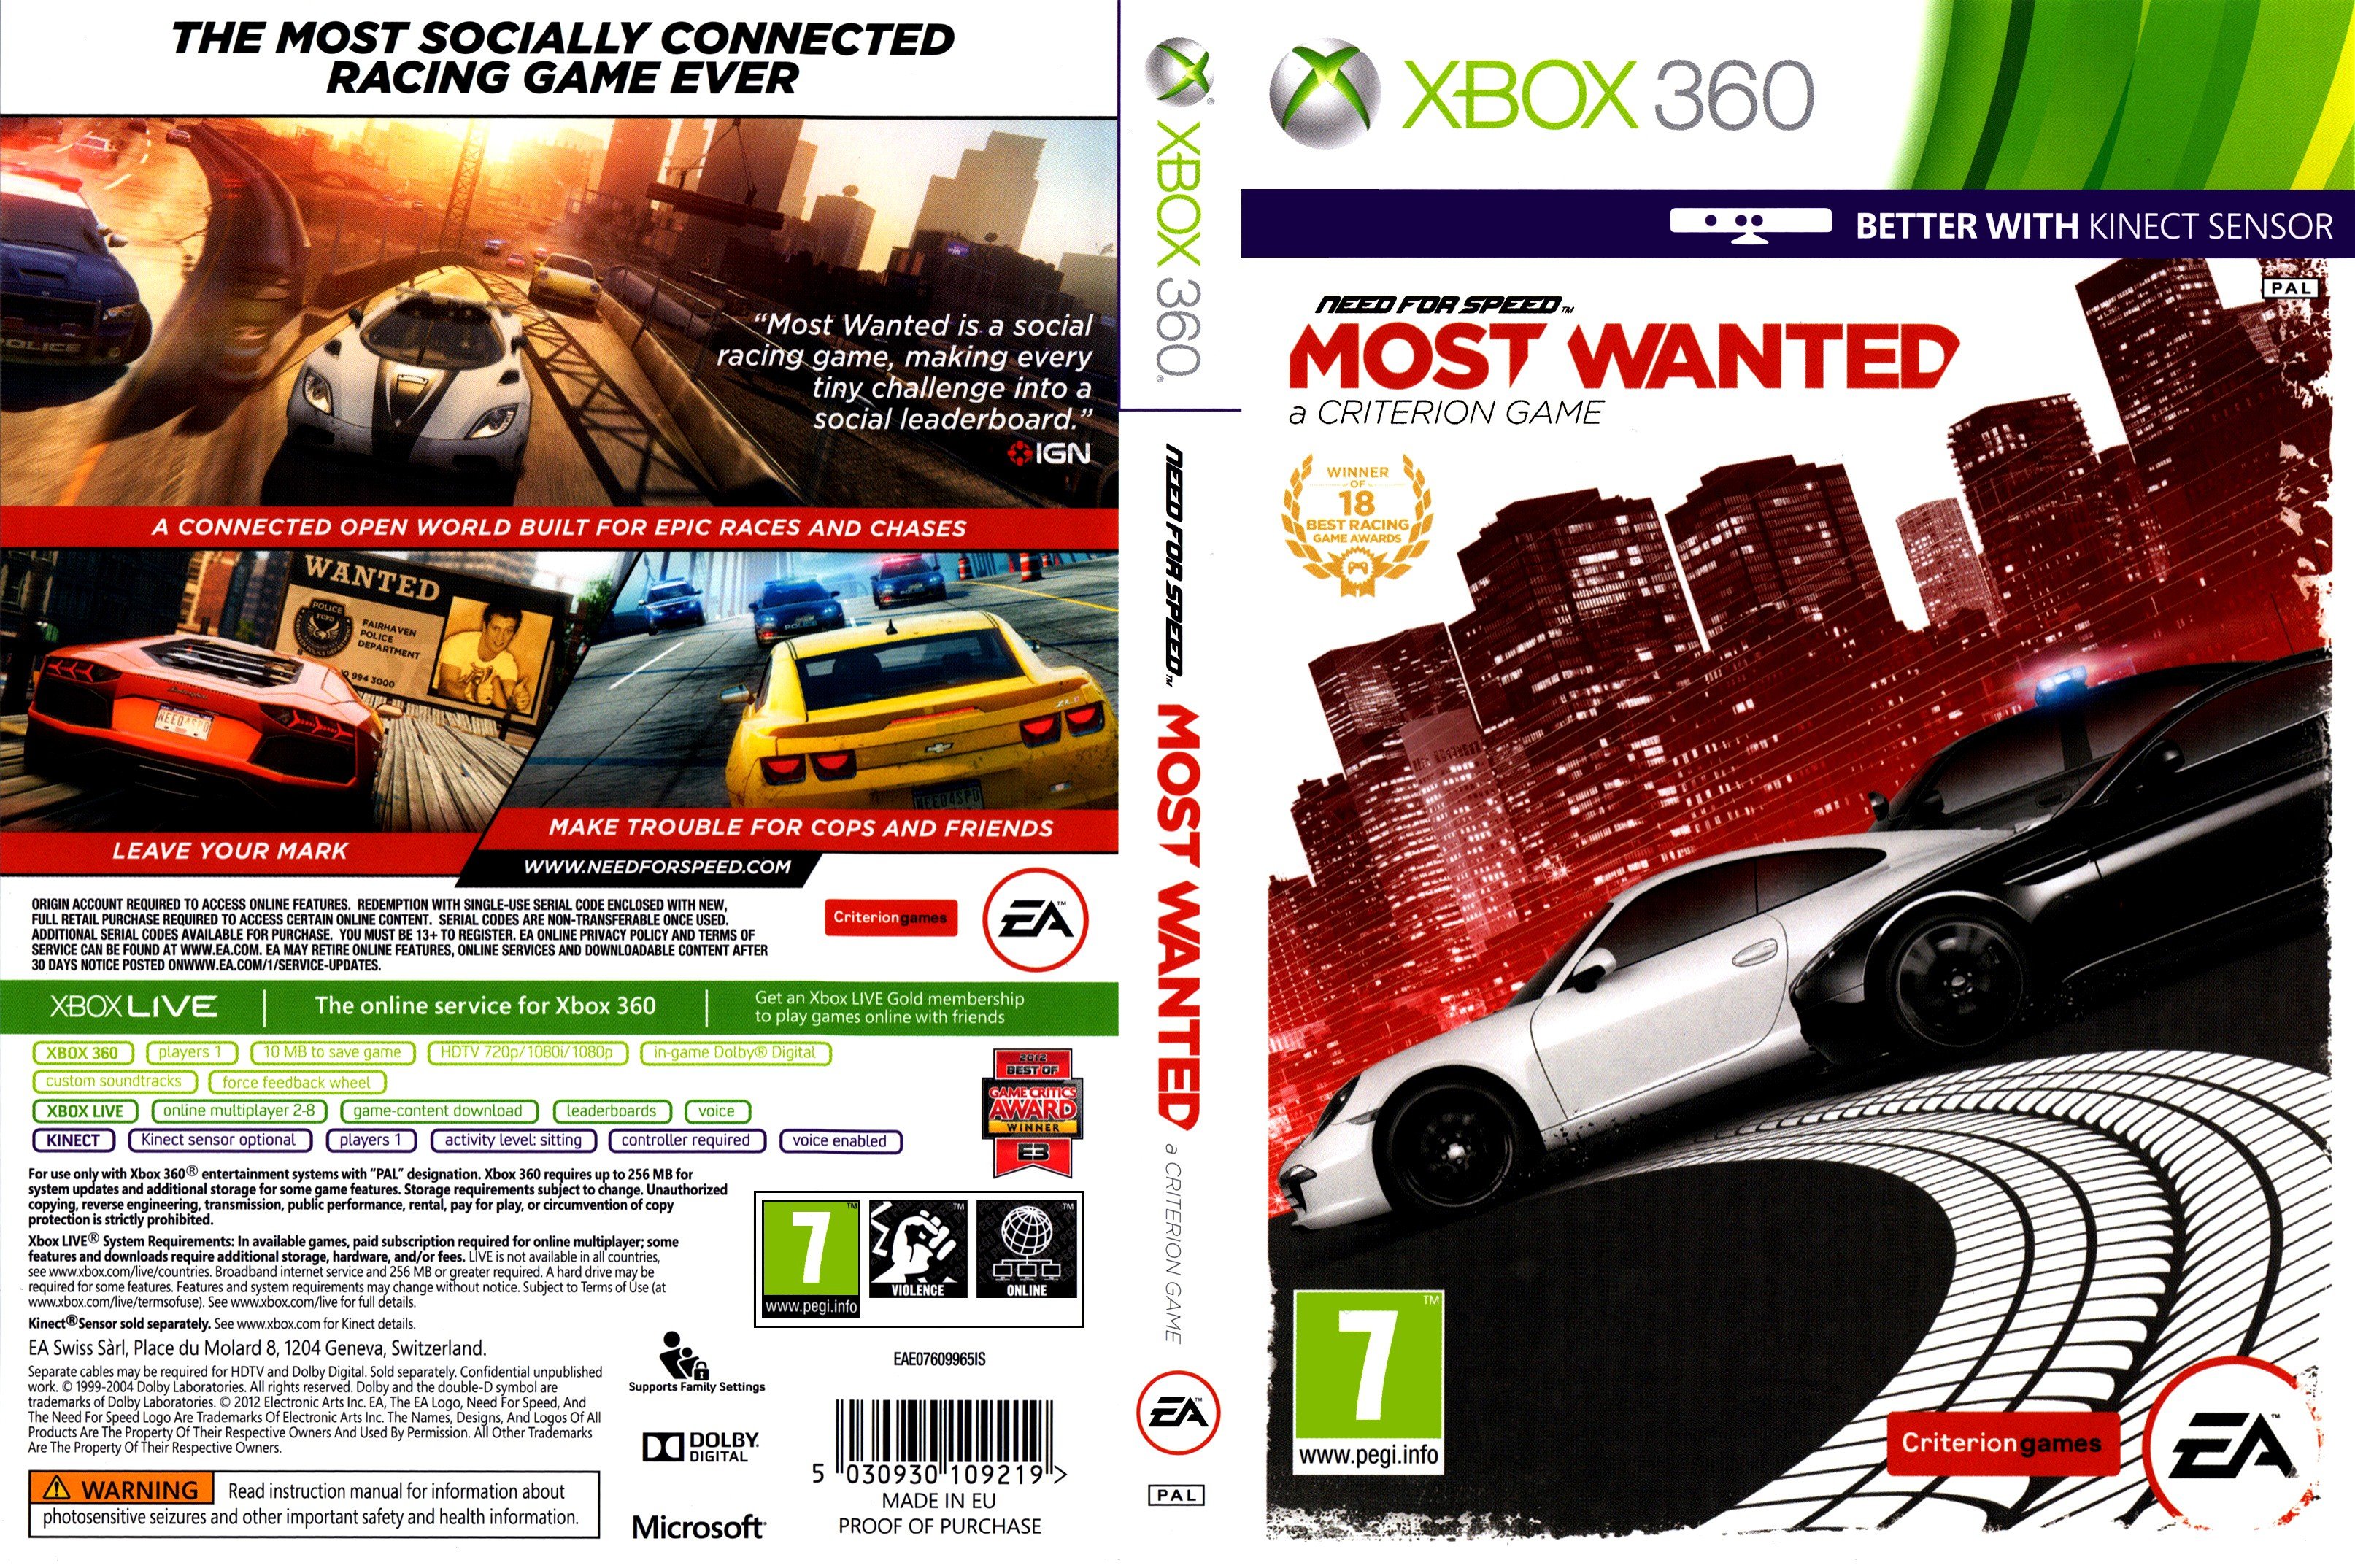 Nfs most wanted xbox. Need for Speed Xbox 360 диск. NFS most wanted диск Xbox 360. Приставка игровая Xbox 360 need for Speed. NFS most wanted 2012 Xbox 360.